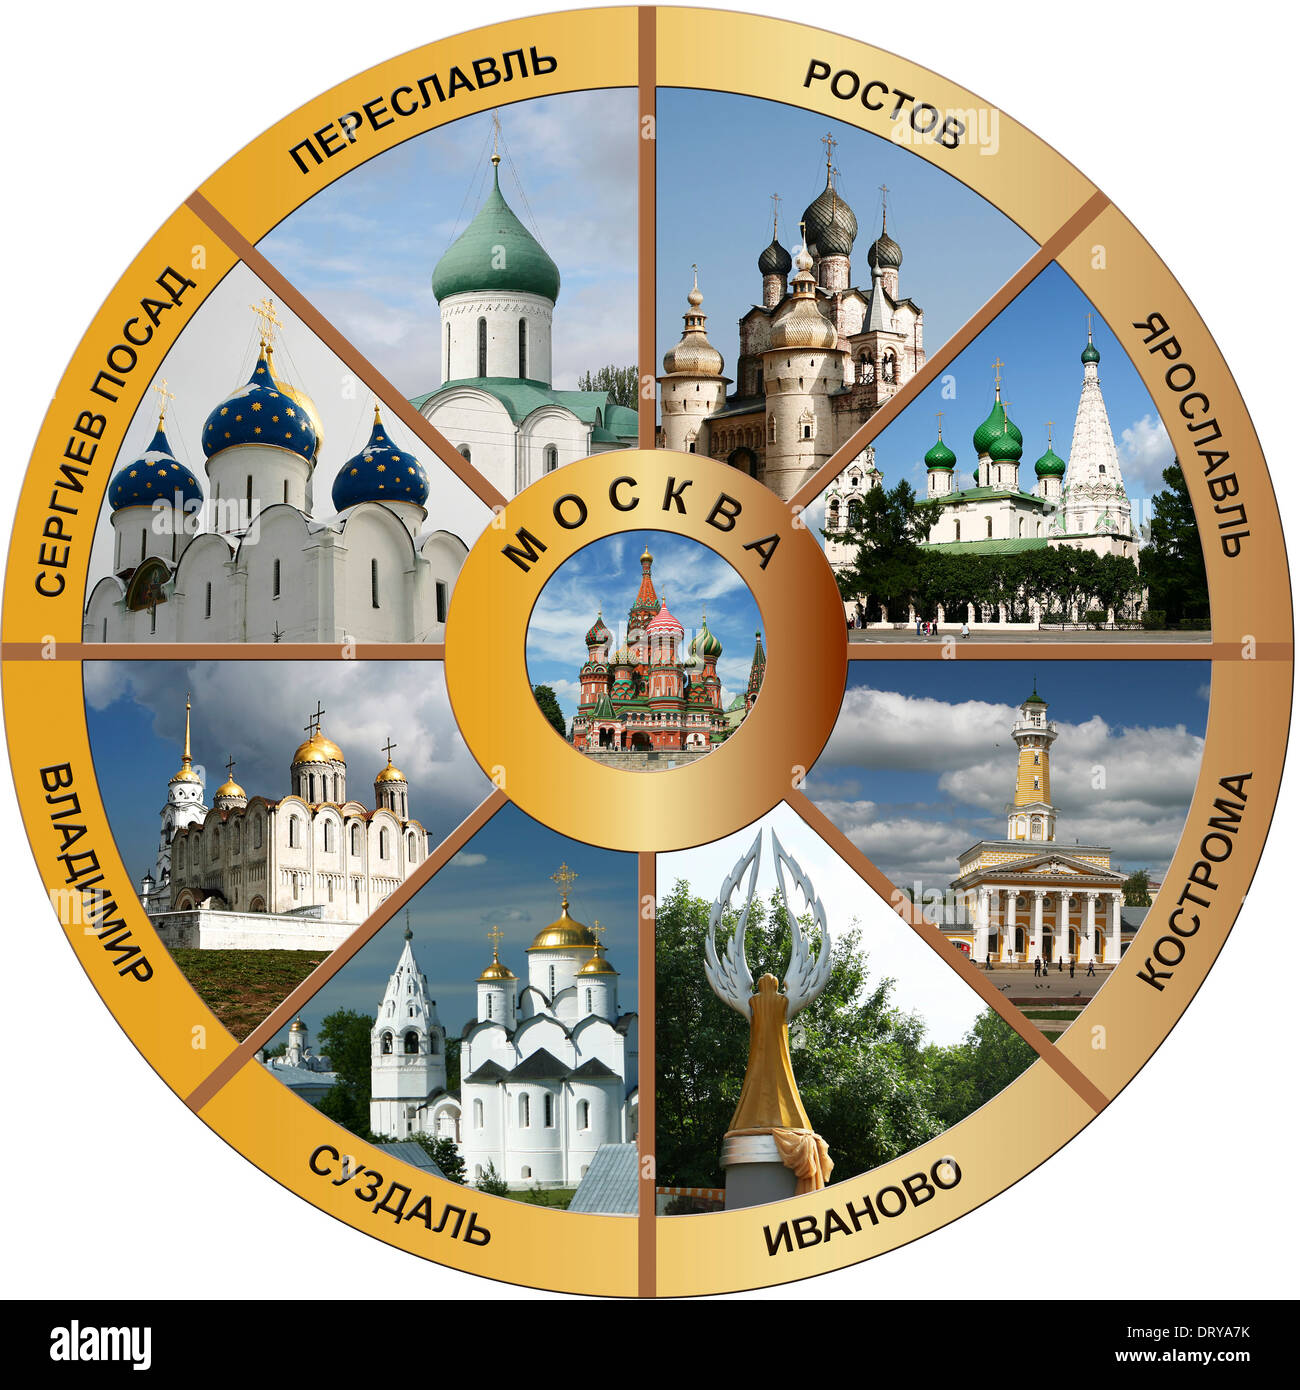 Vladimir: An Ancient City on the Golden Ring